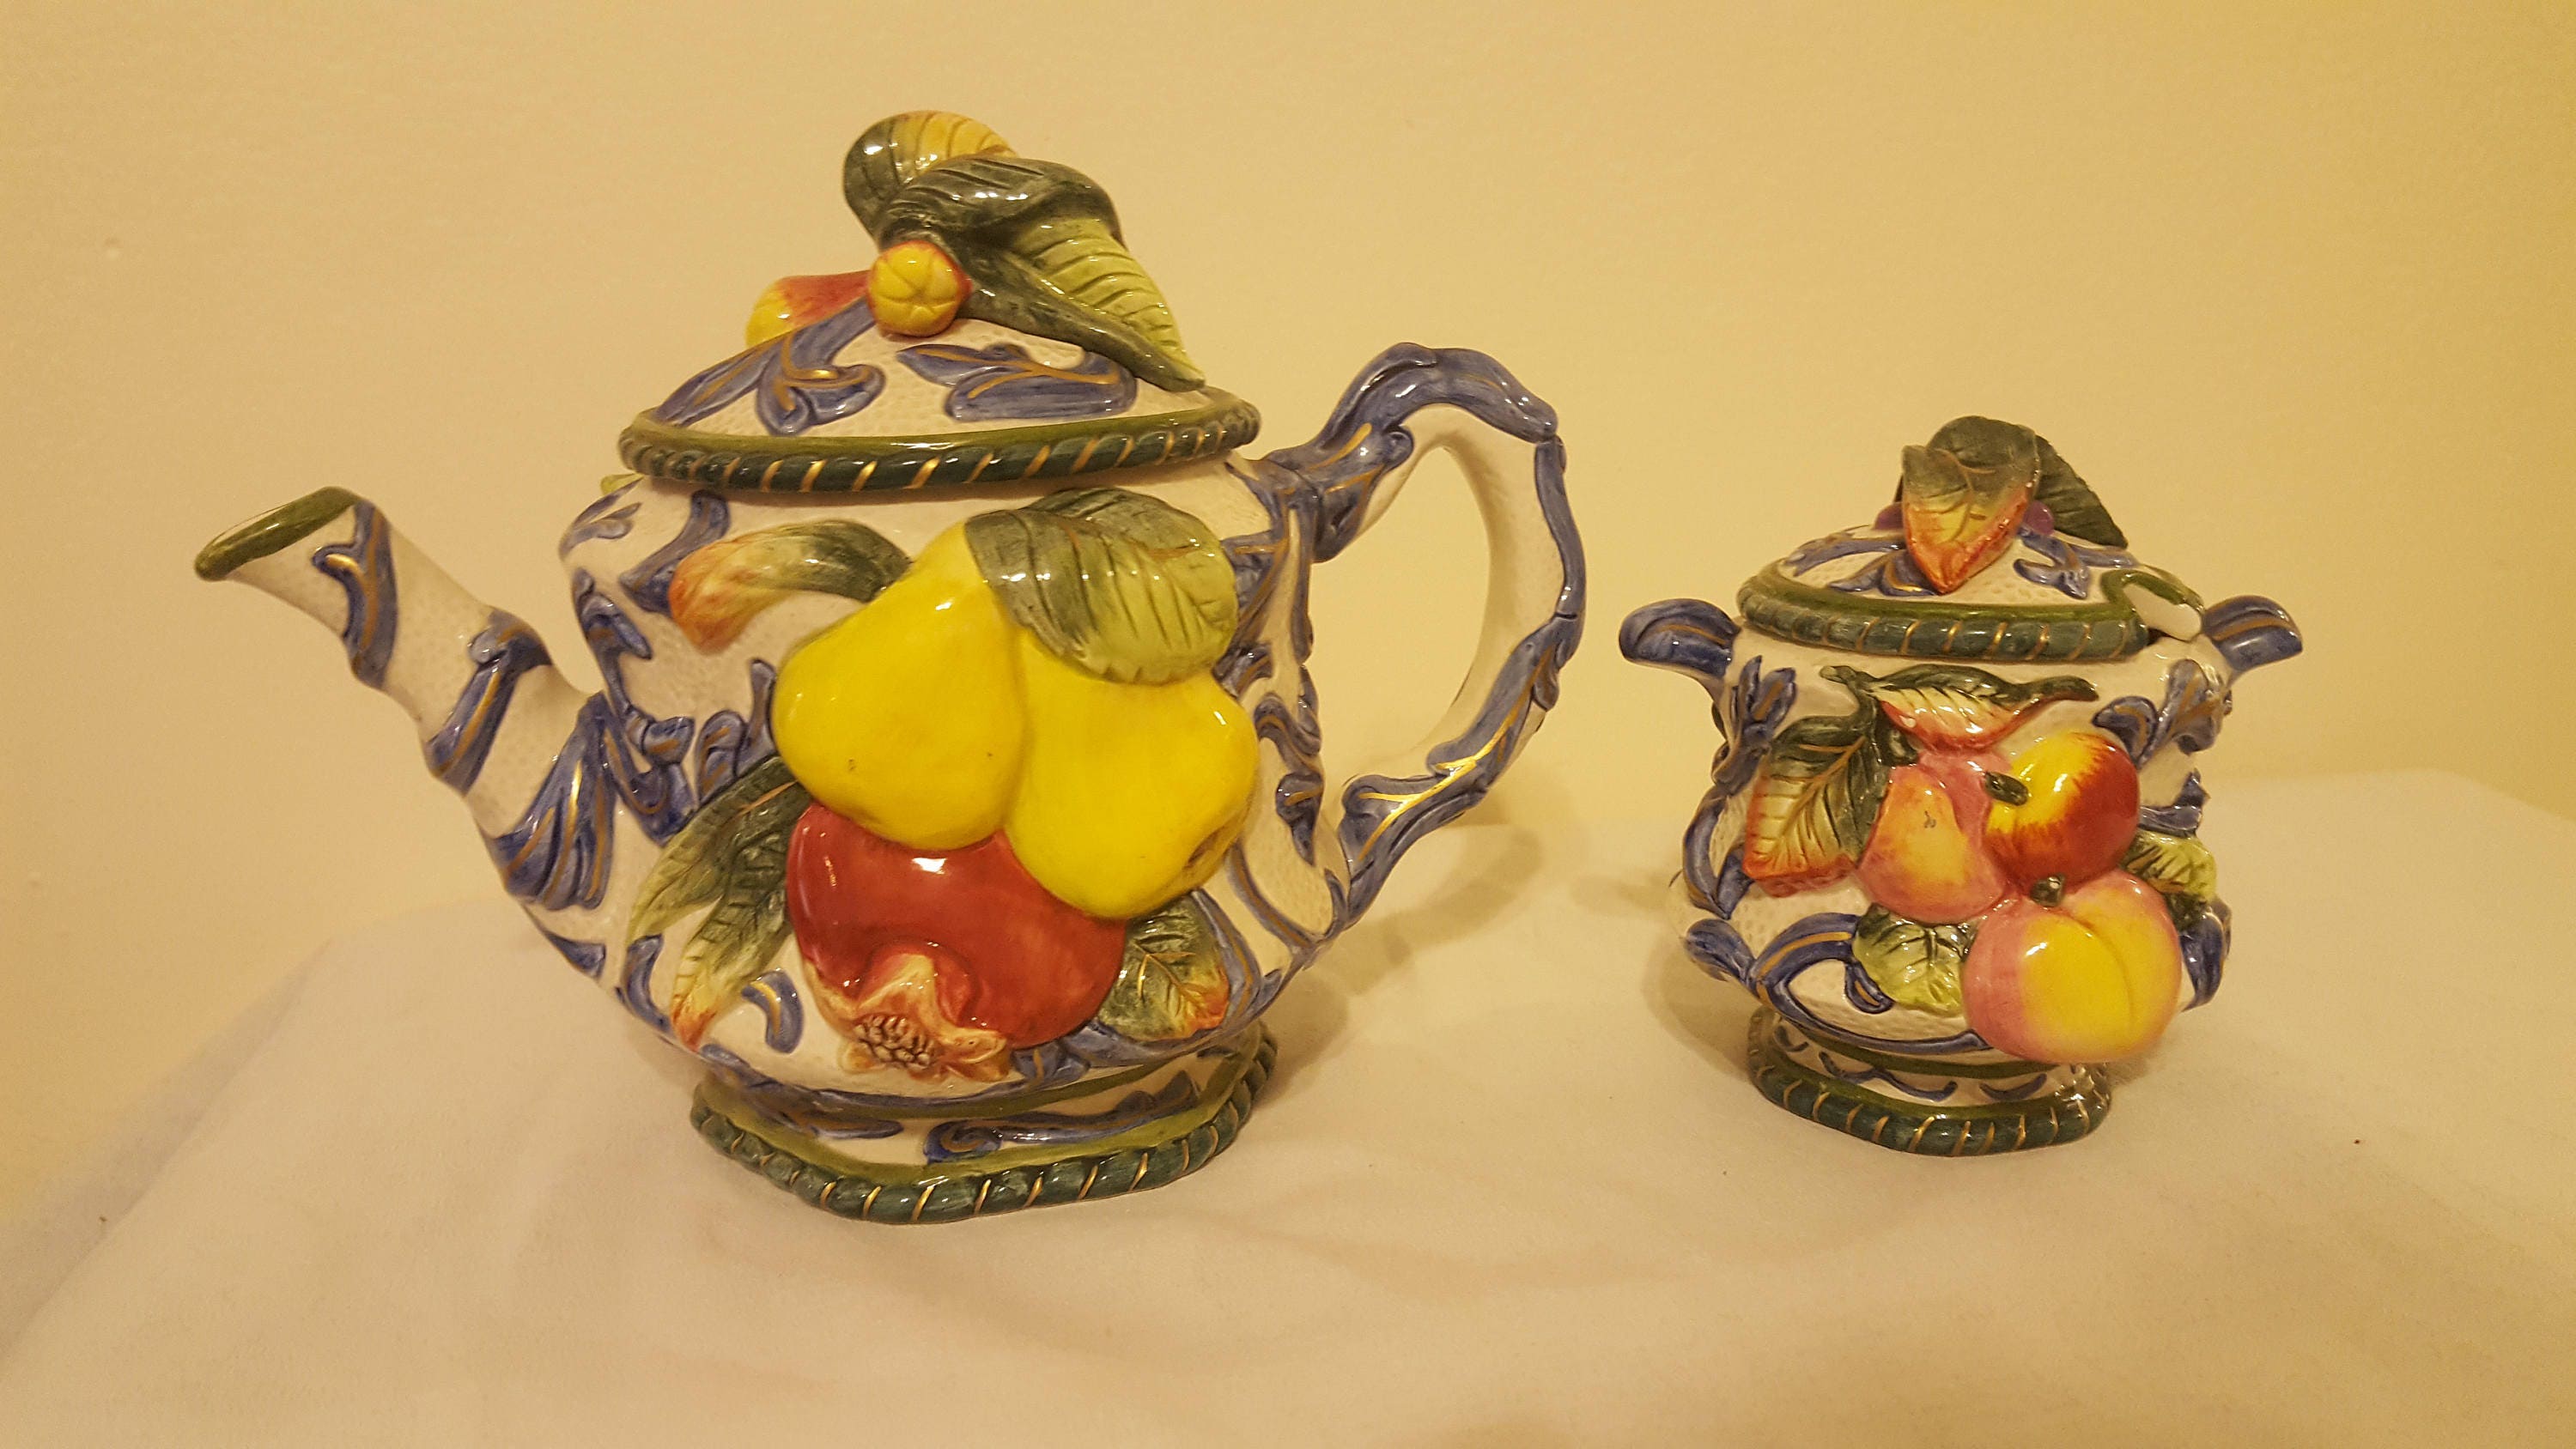 ON SALE Vintage Teapot Fitz and Floyd Fitz and Floyd